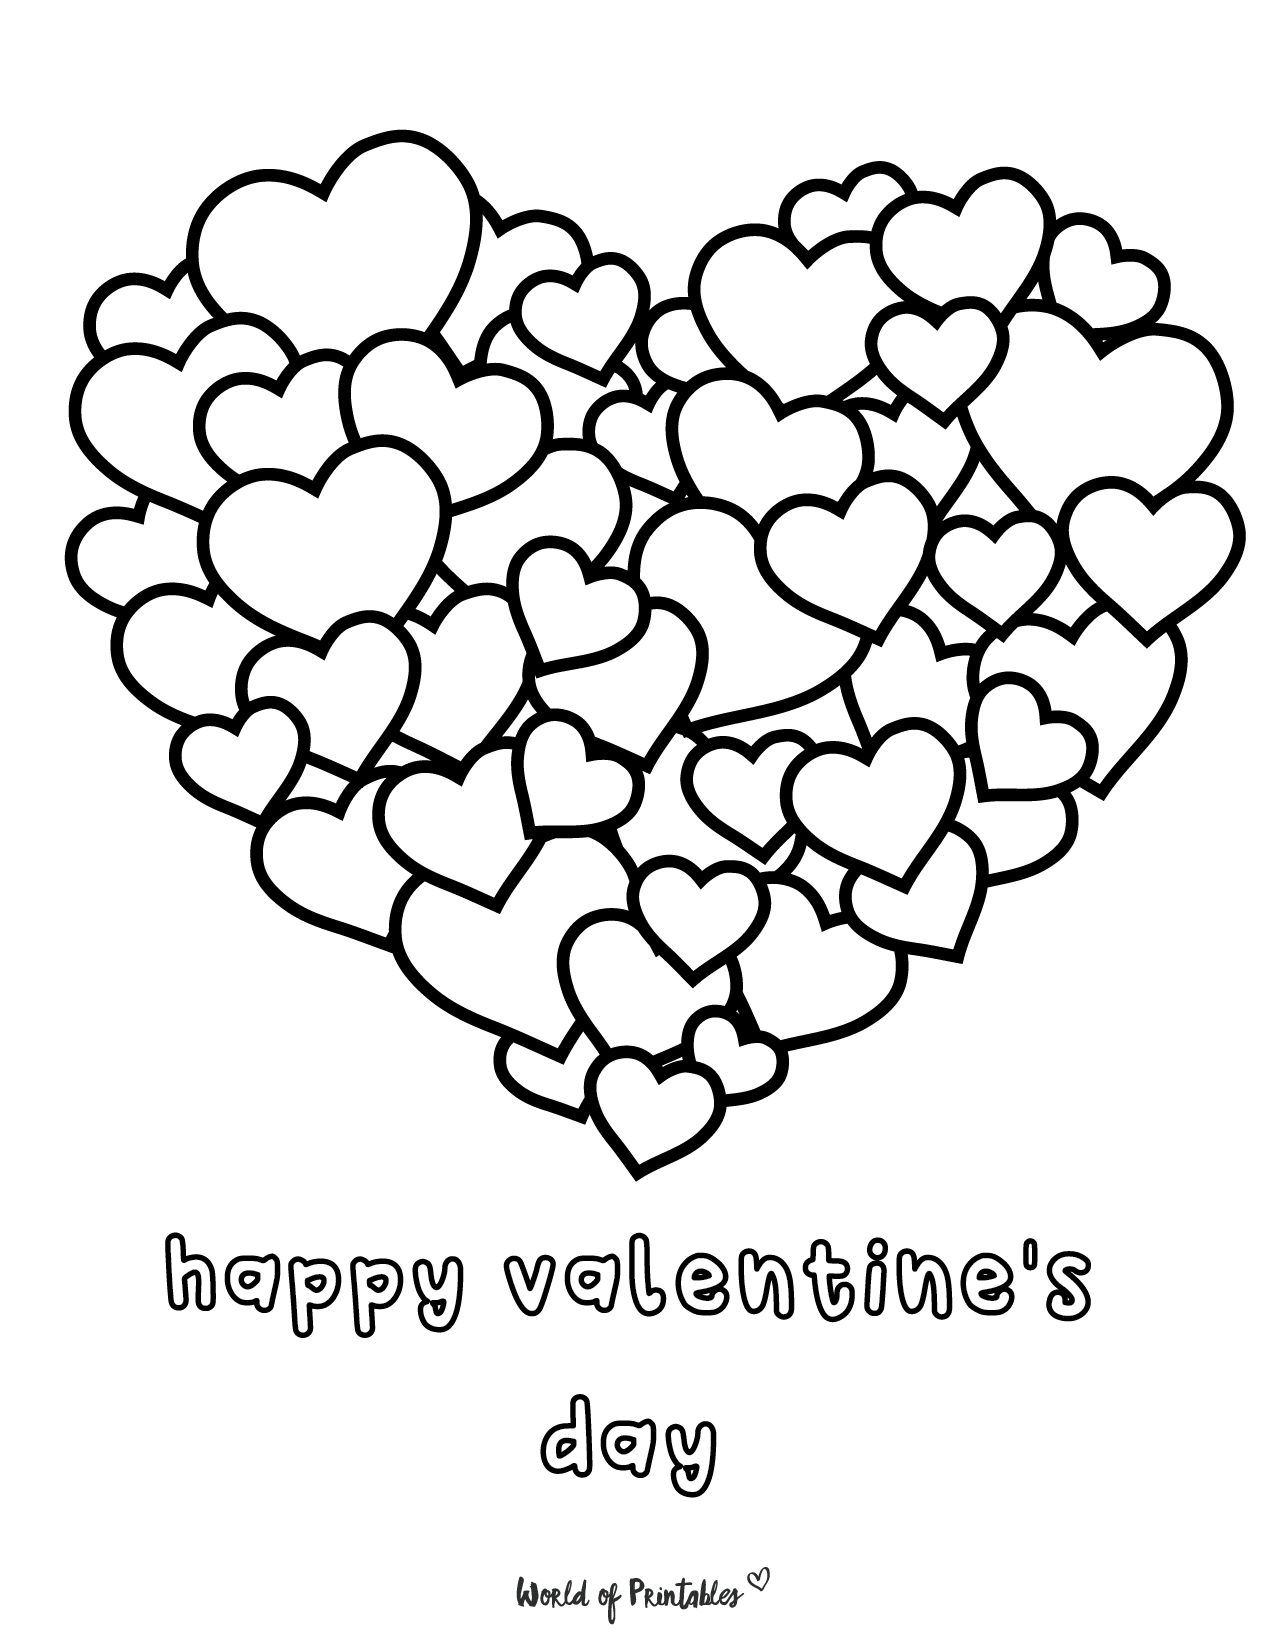 Valentines Day Coloring Pages - 50 Free Printables To Color - World of Printables